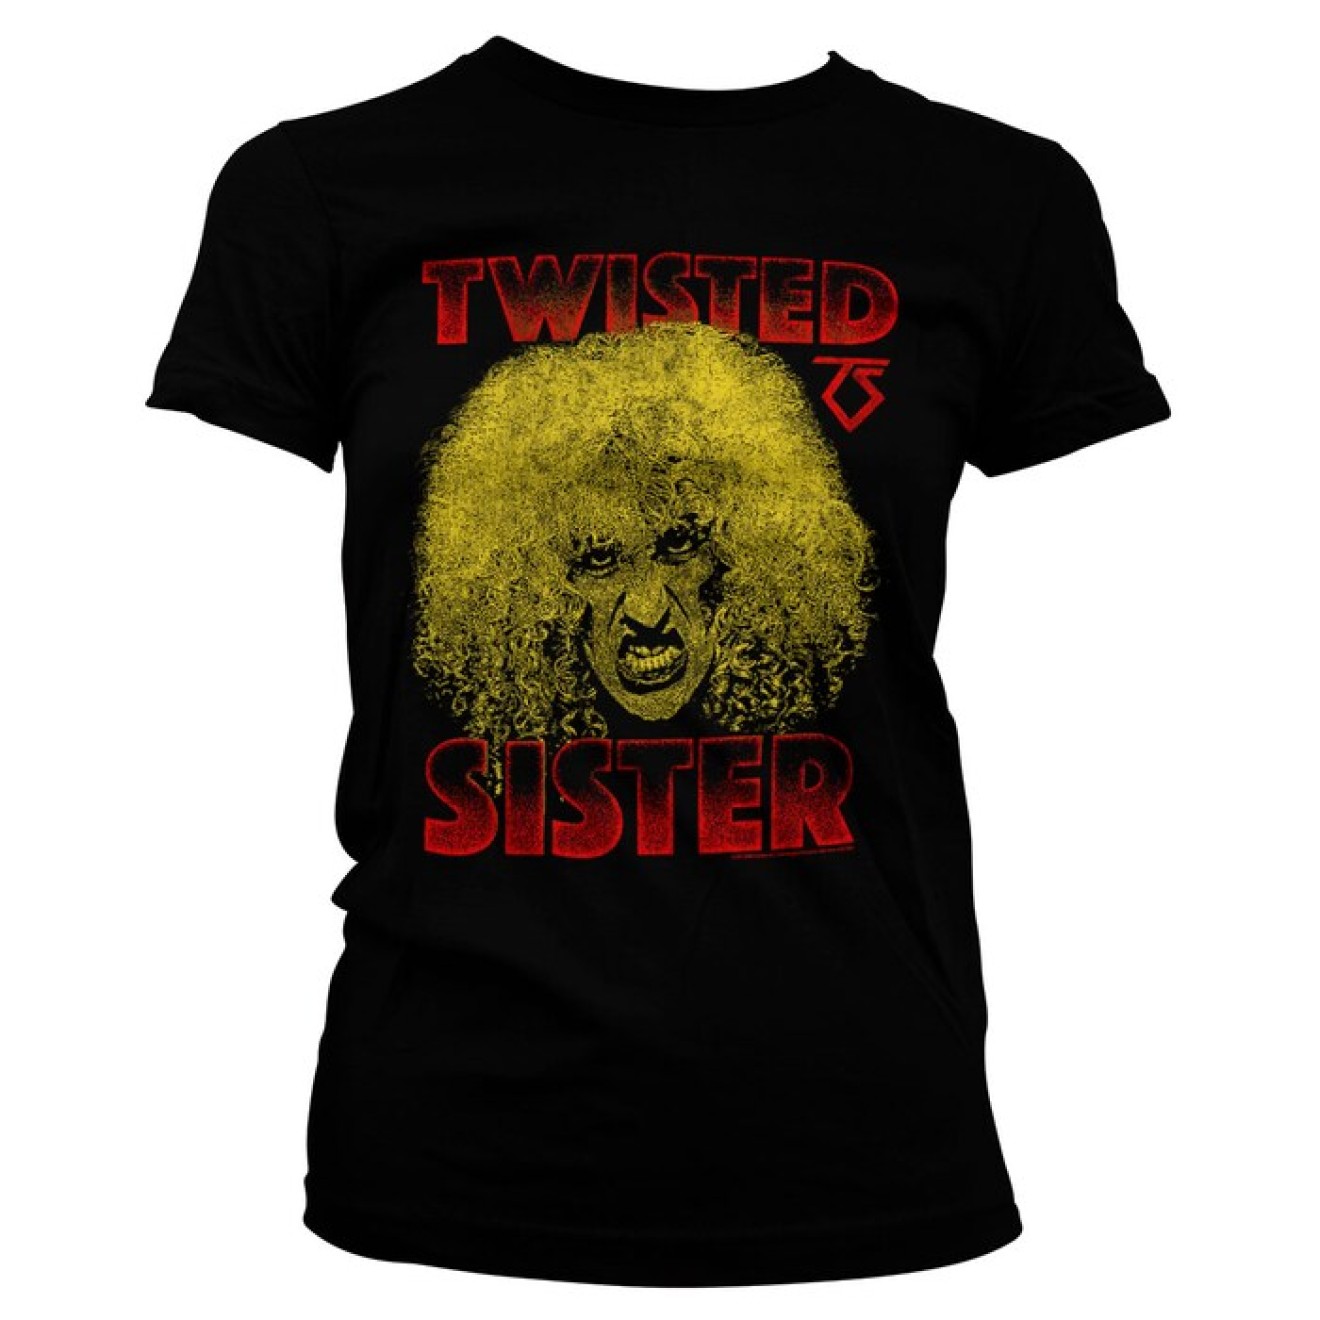 Twisted Sister - Dee Snider Girly Tee